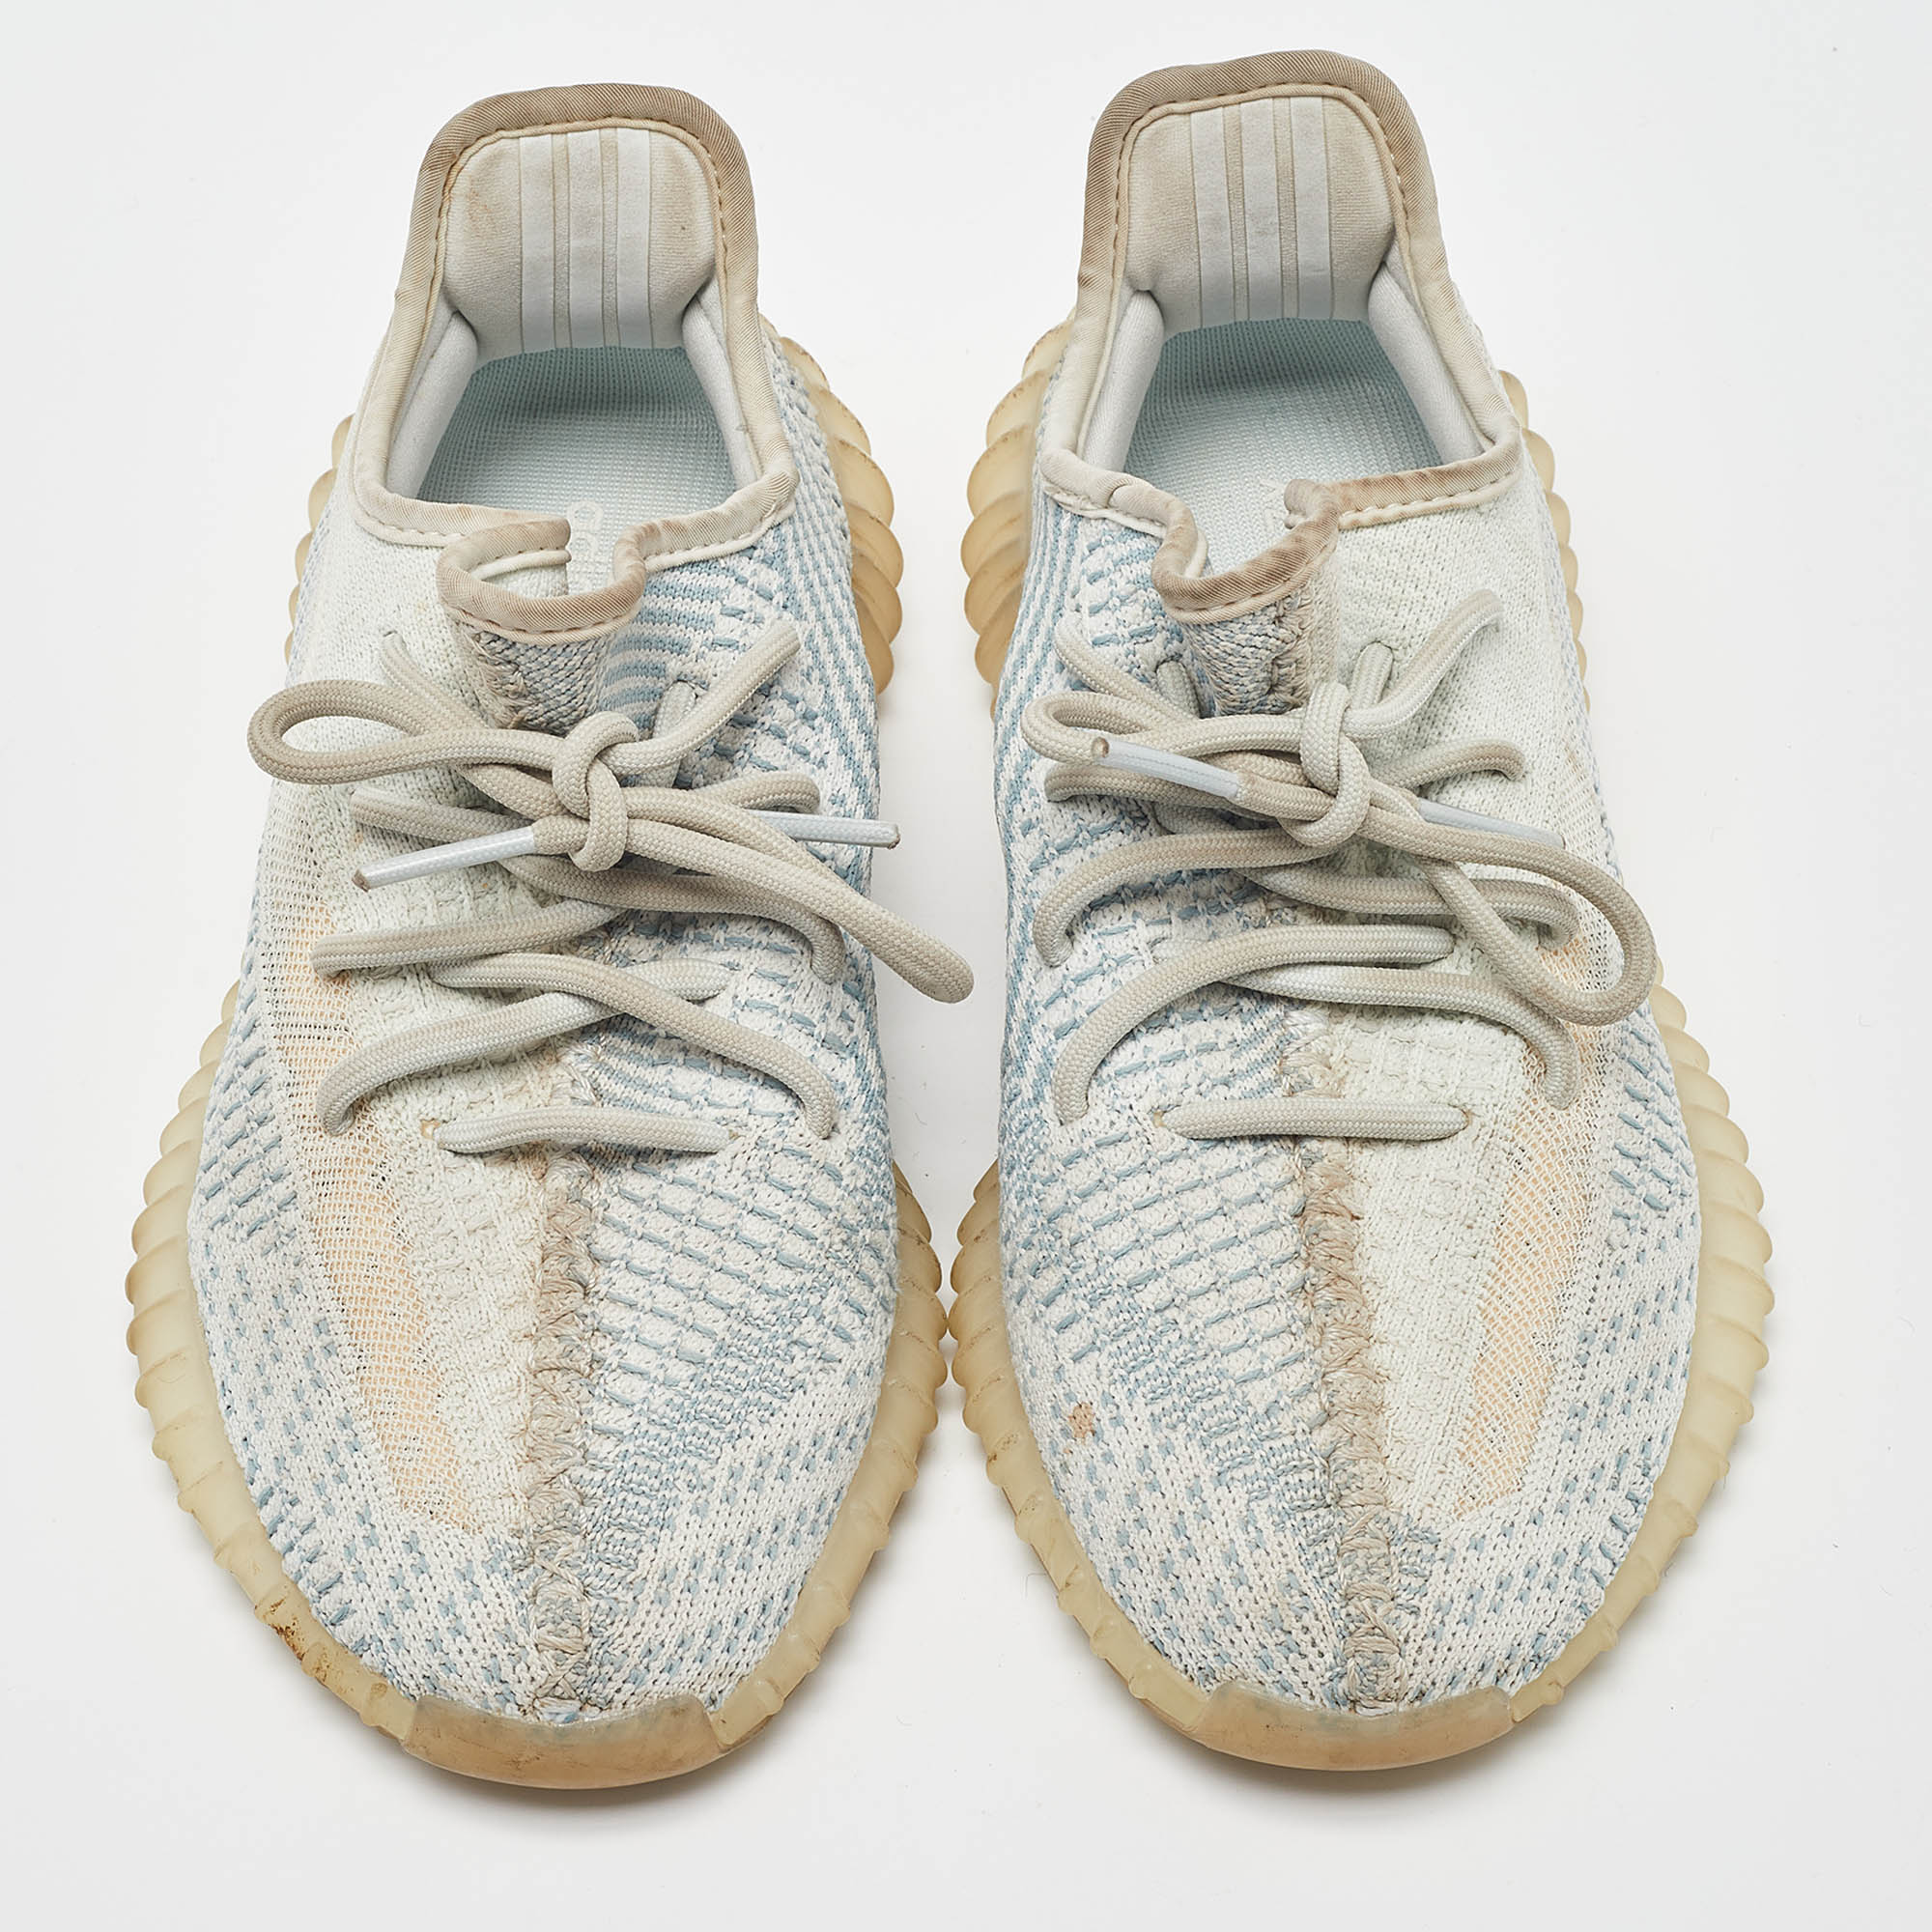 Yeezy X Adidas White/Green Knit Fabric Boost 350 V2 Cloud White Non Reflective Sneakers Size 38 2/3